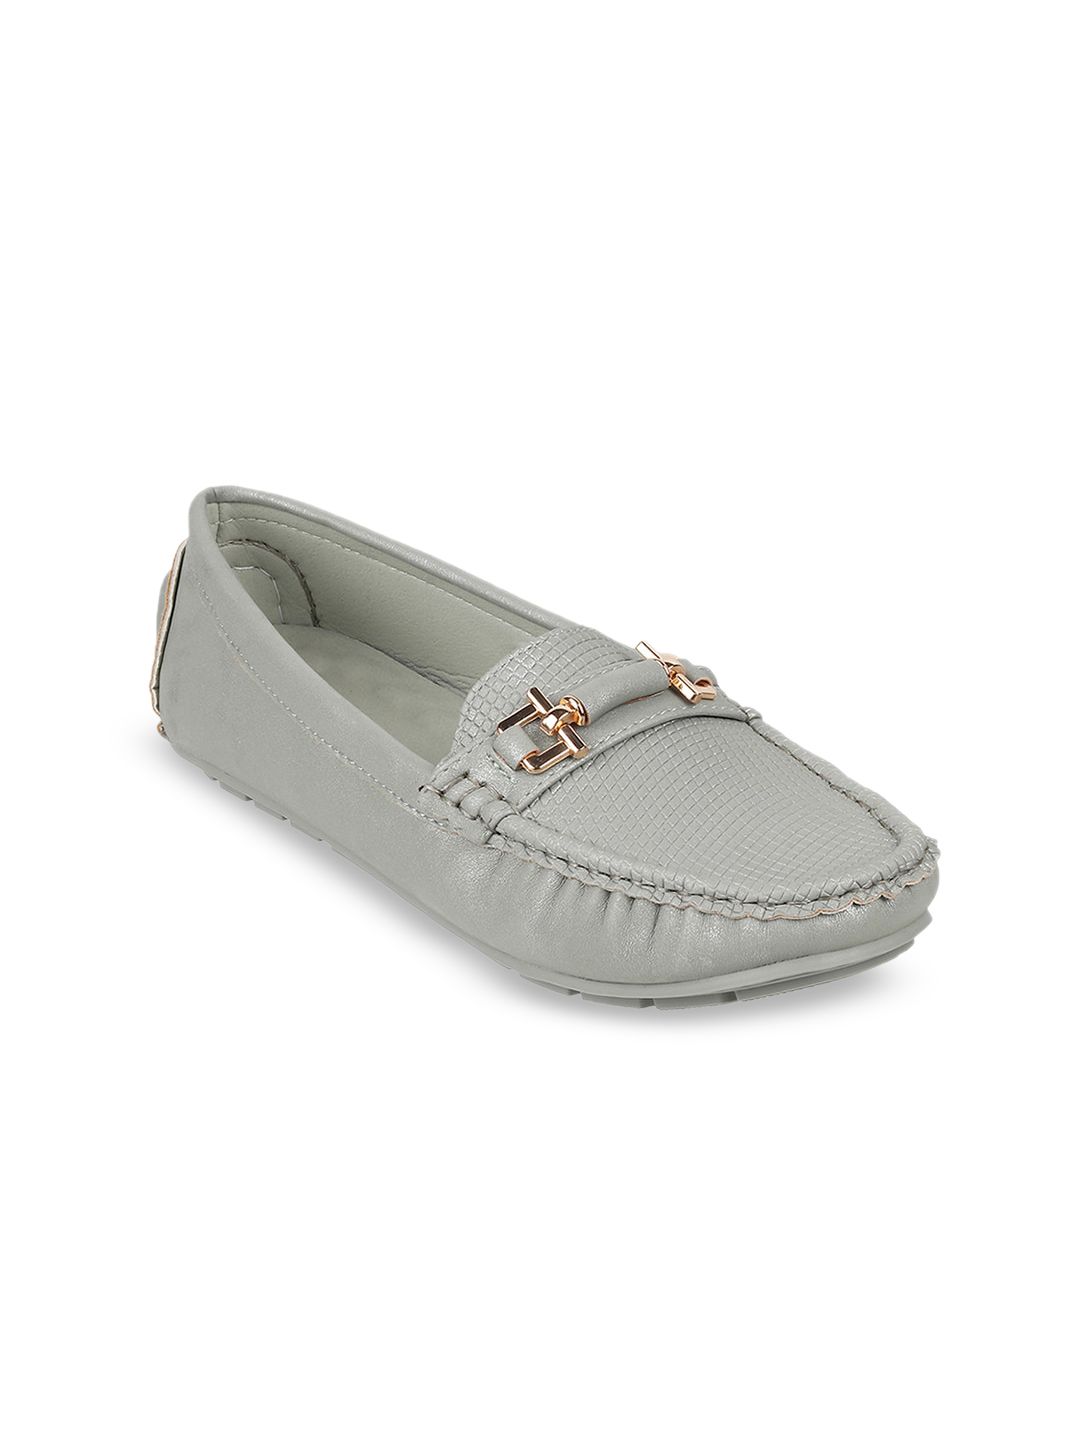 Mochi Women Embellished Loafers Price in India